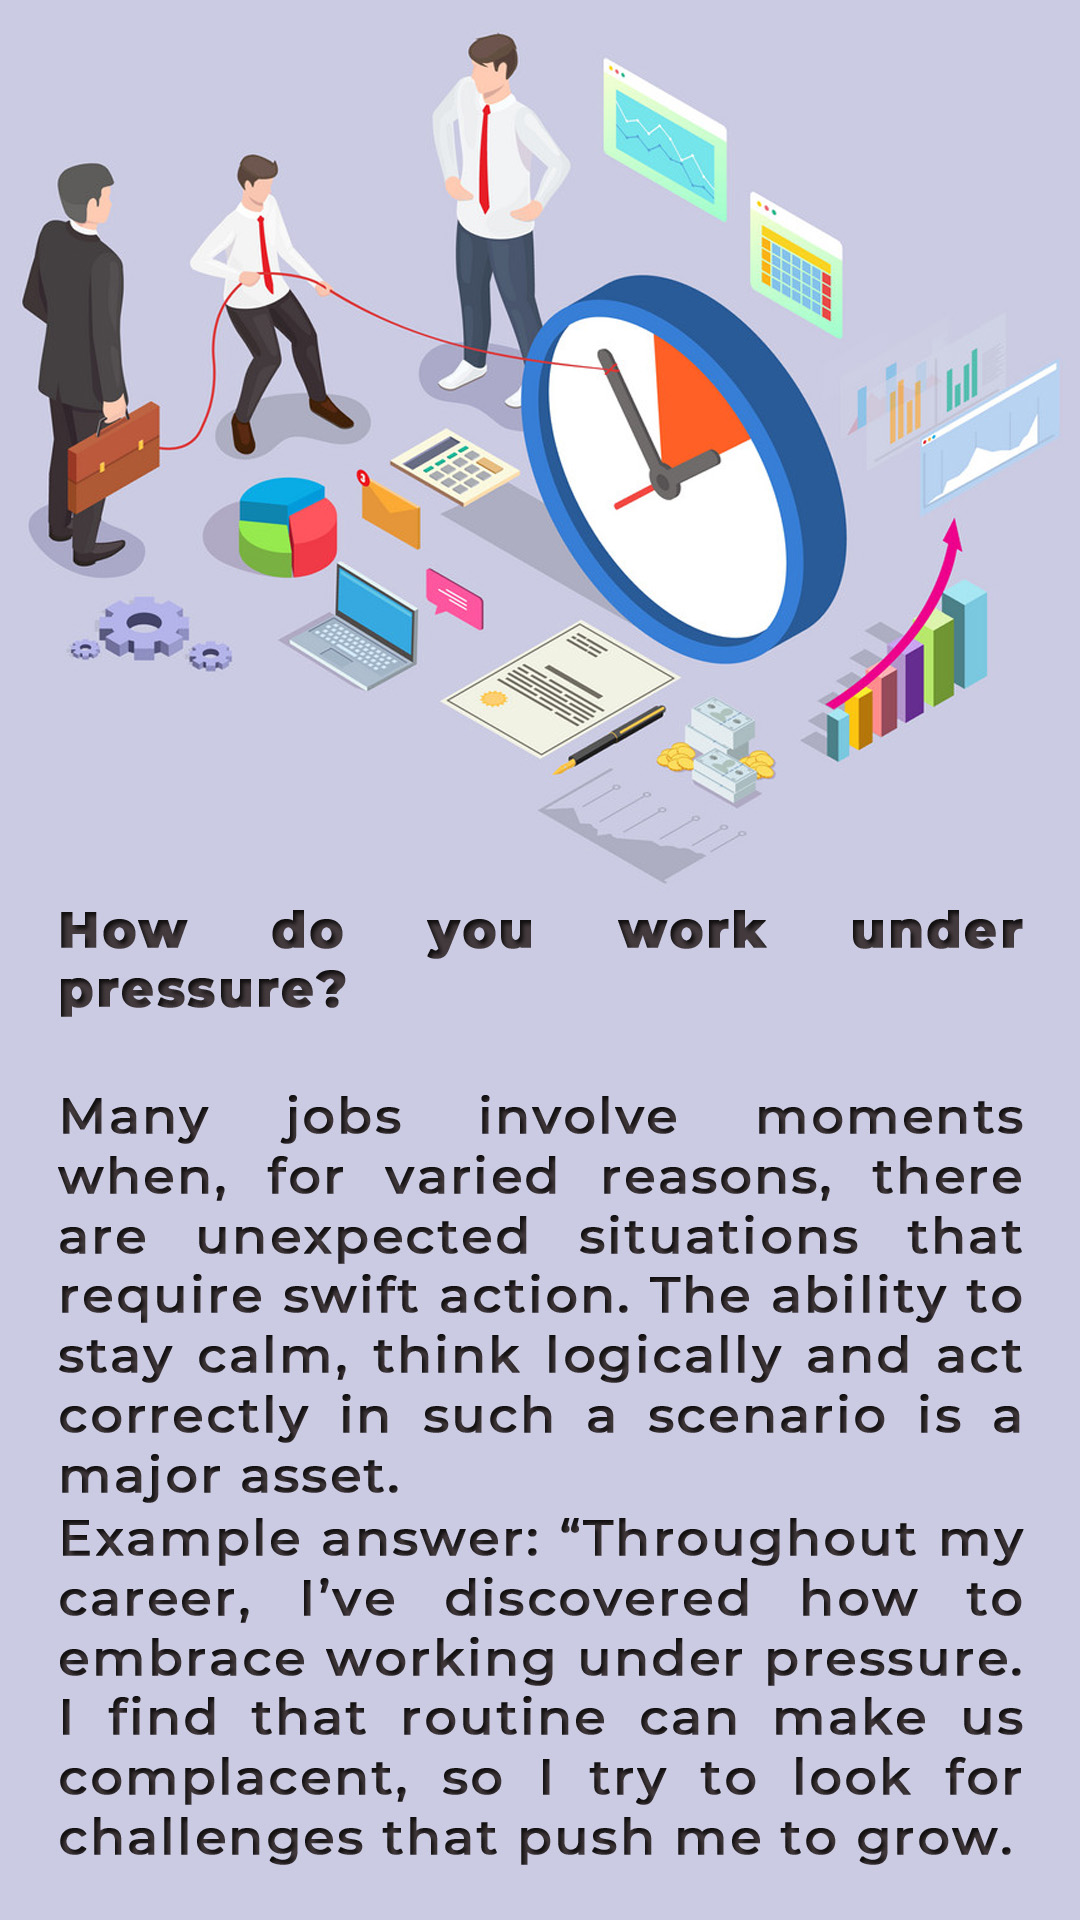 How do you work under pressure?